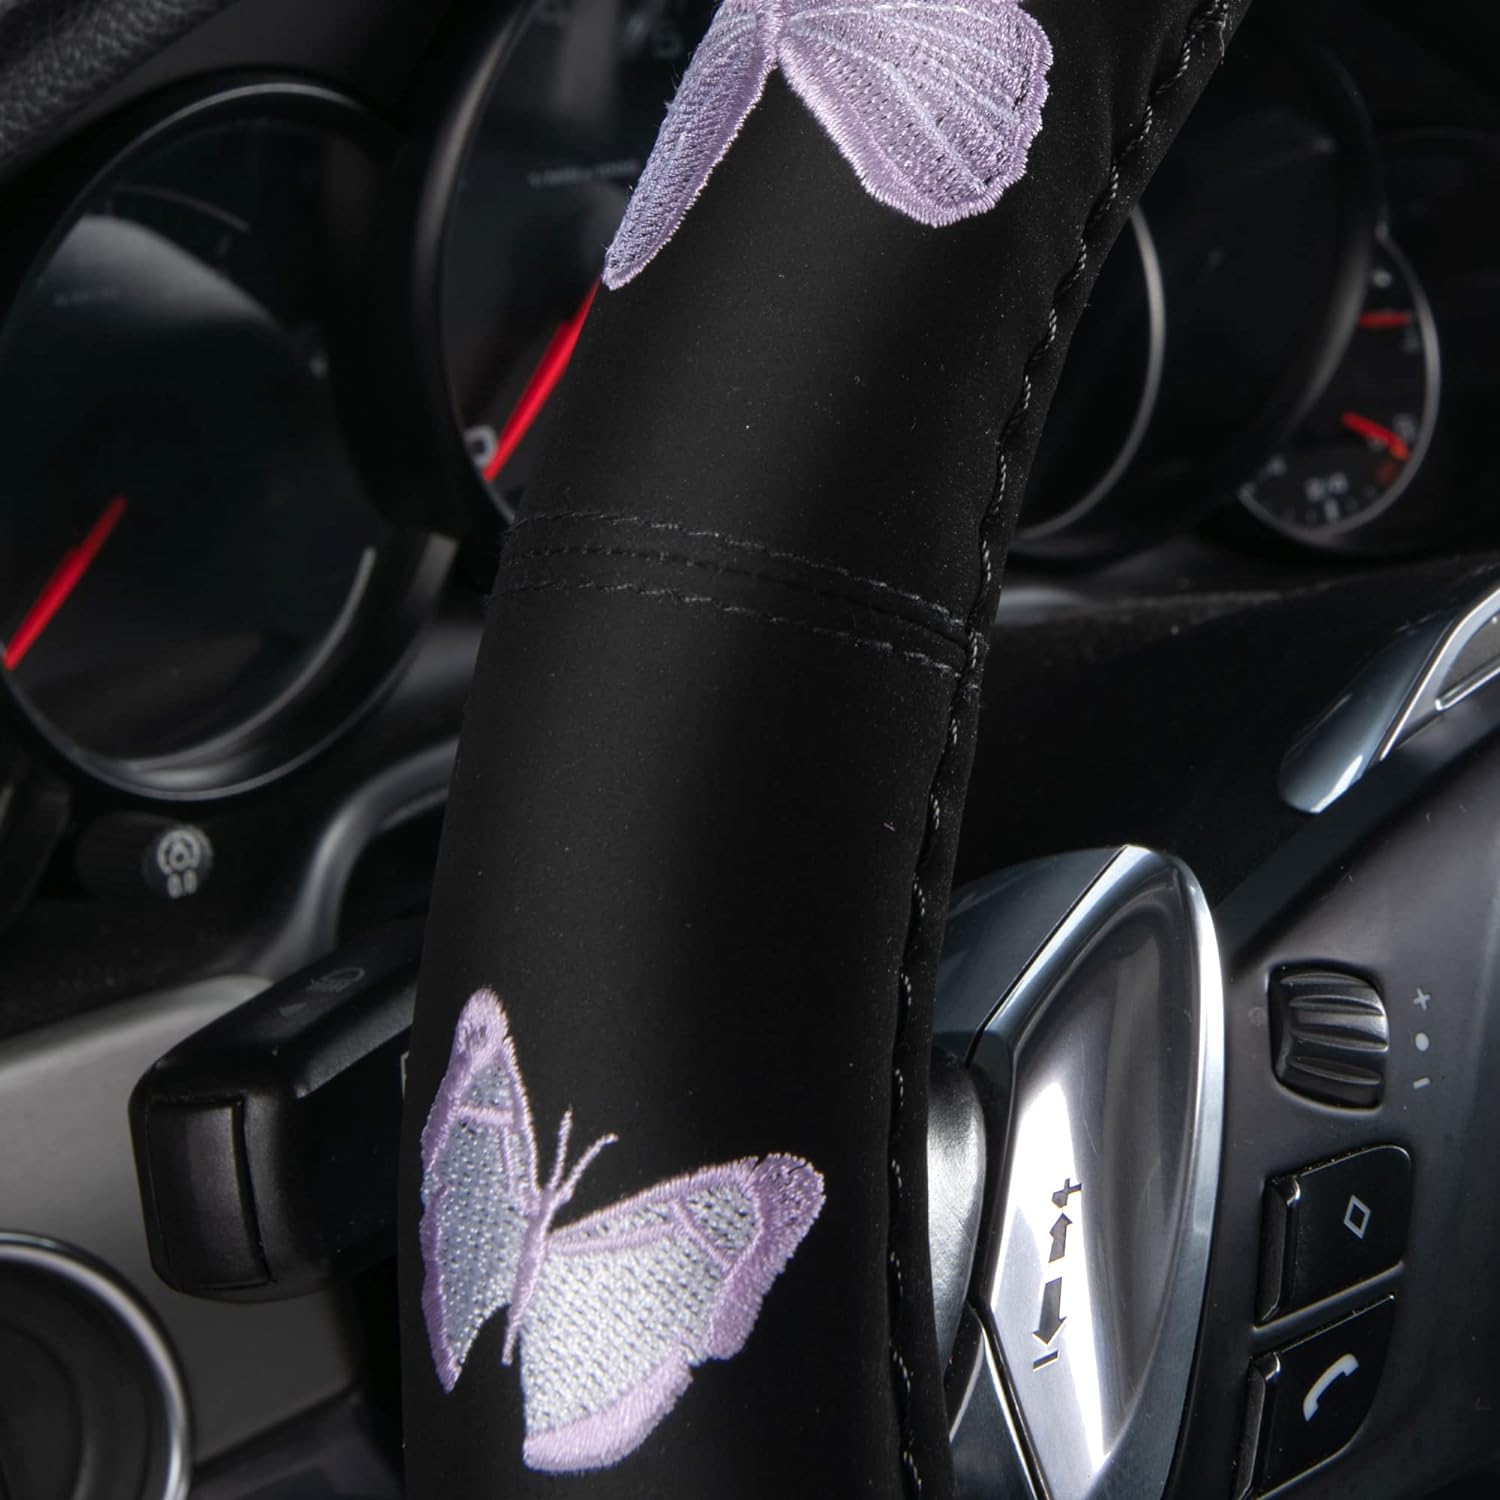 Car Pass Pink Embroidery Butterfly Steering Wheel Cover, Universal 15 Inch Car Wheel Cover for Women Girls, Fit for Suvs,Trucks,Sedans,Cars (Black and Pink)